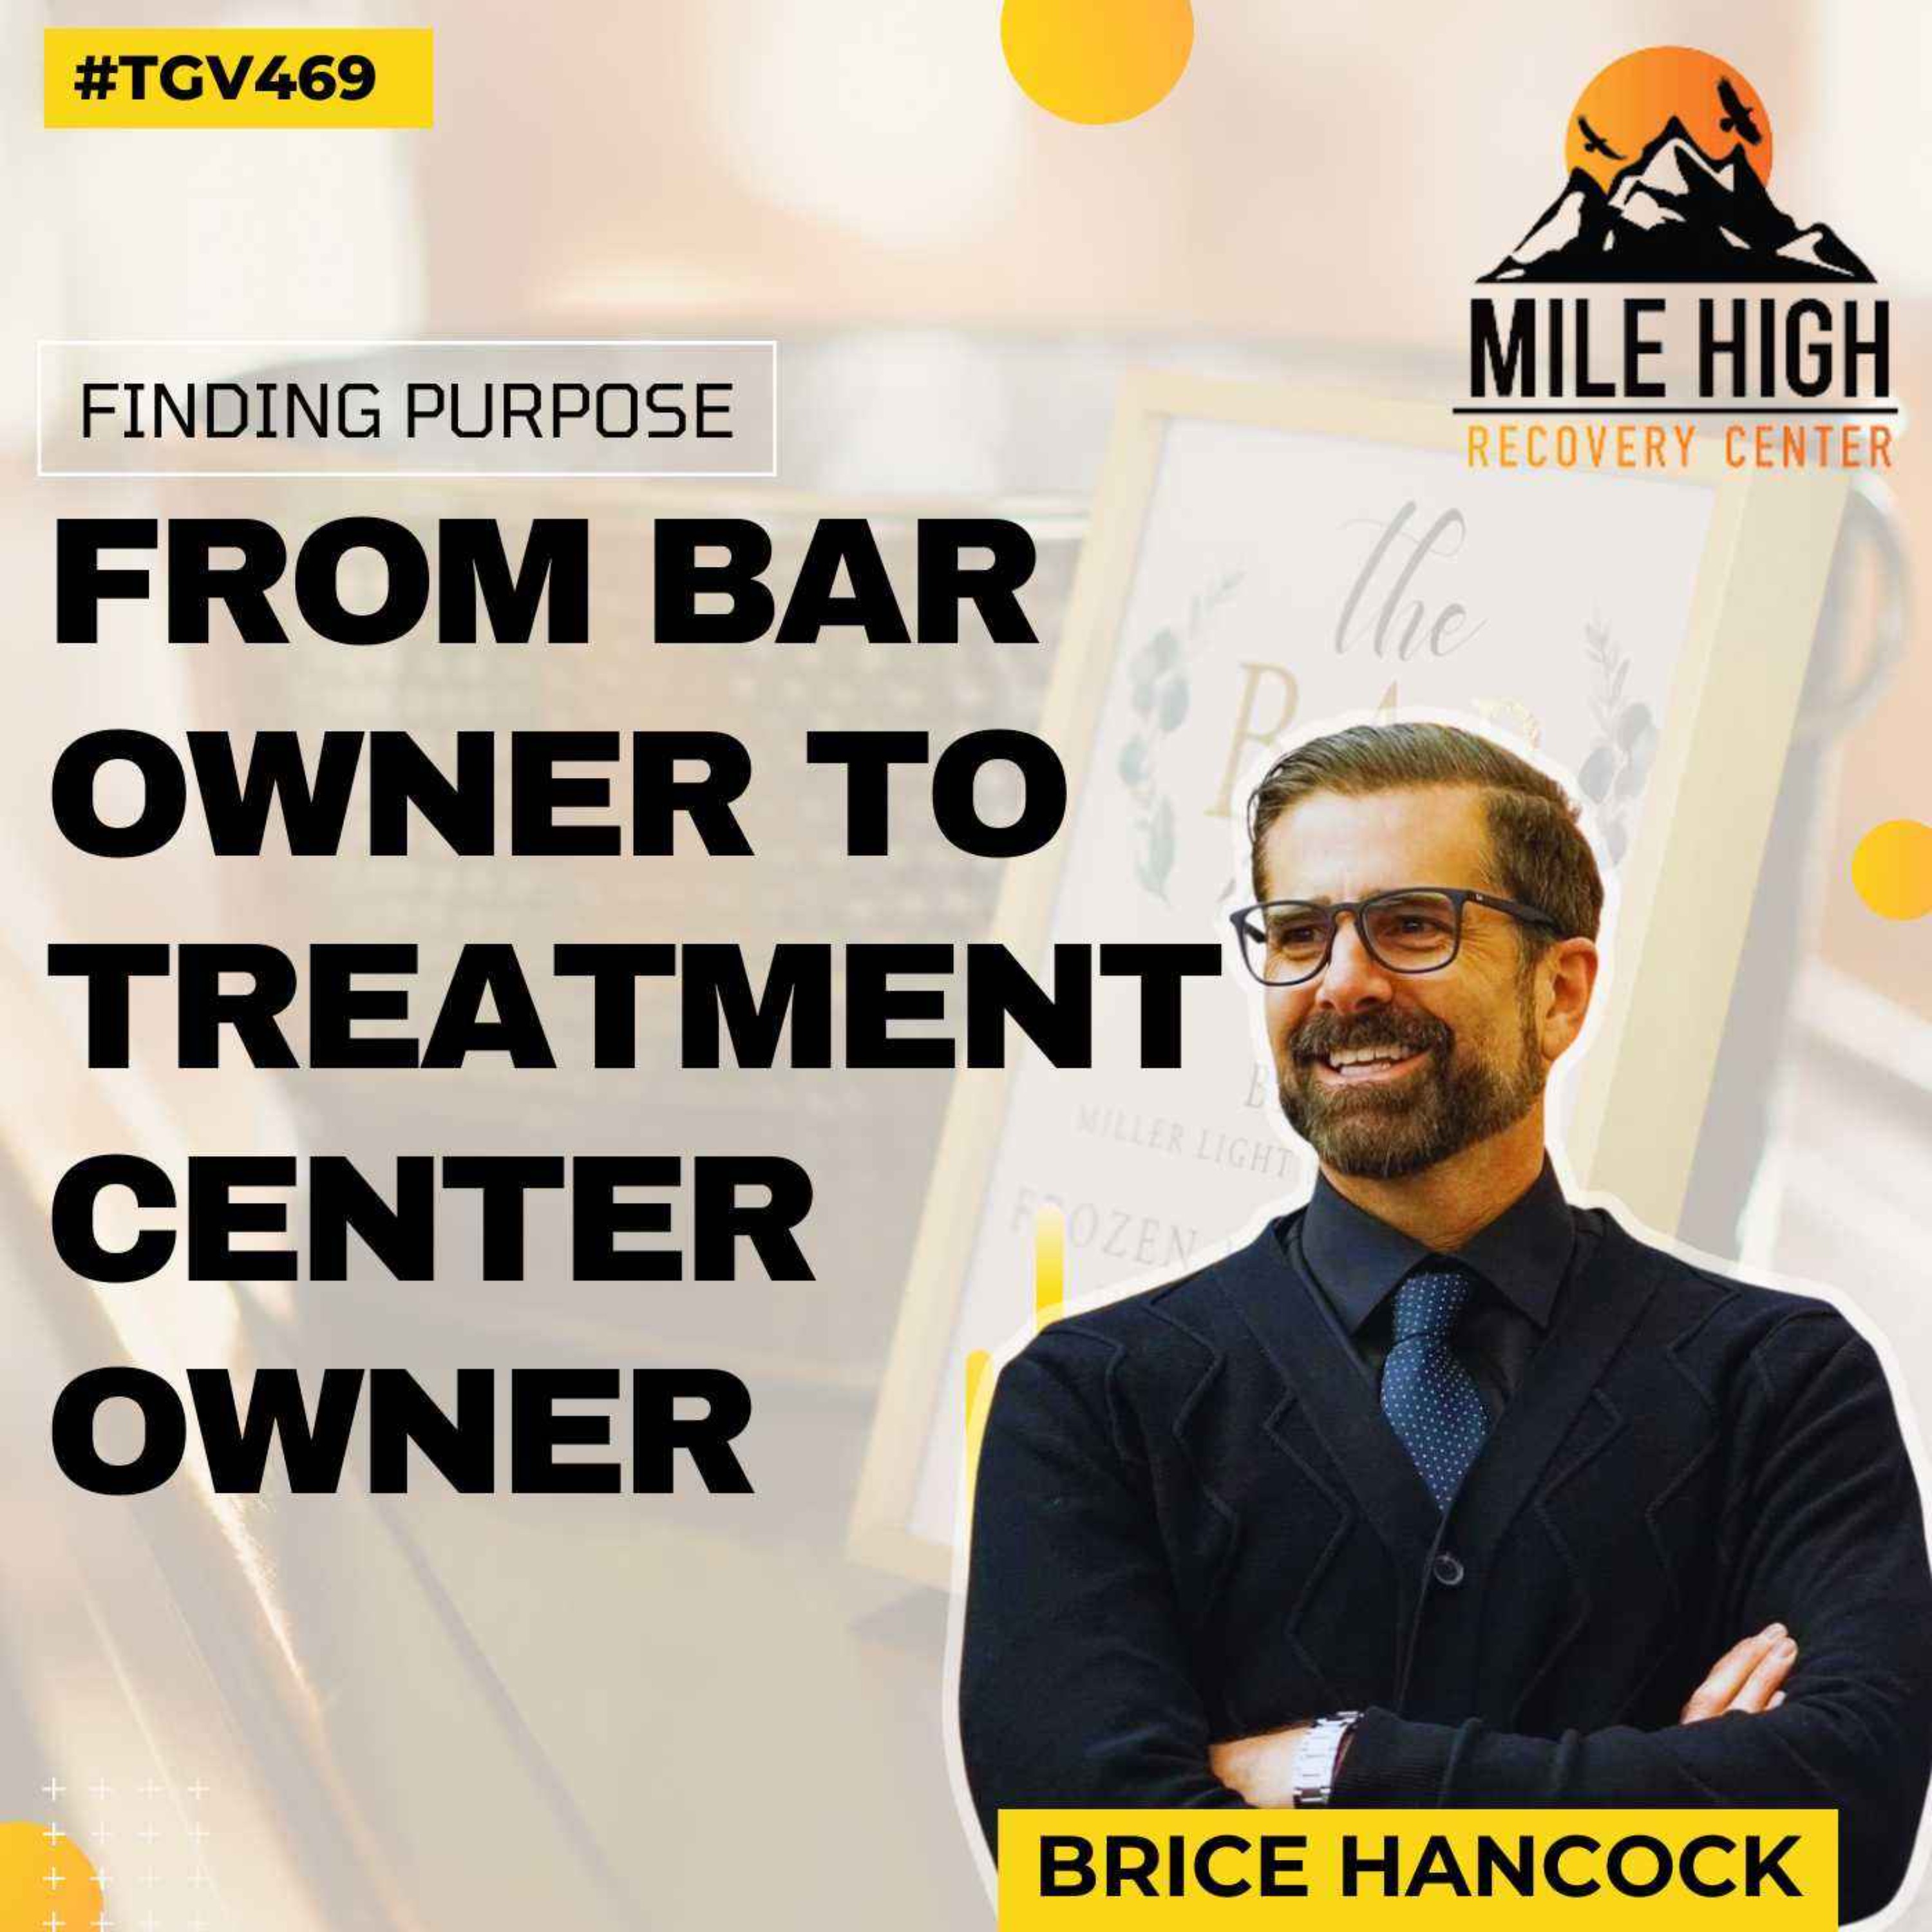 Finding Purpose: From bar owner to treatment center owner  | Brice Hancock(CEO - Mile High Recovery Center) | #TGV469